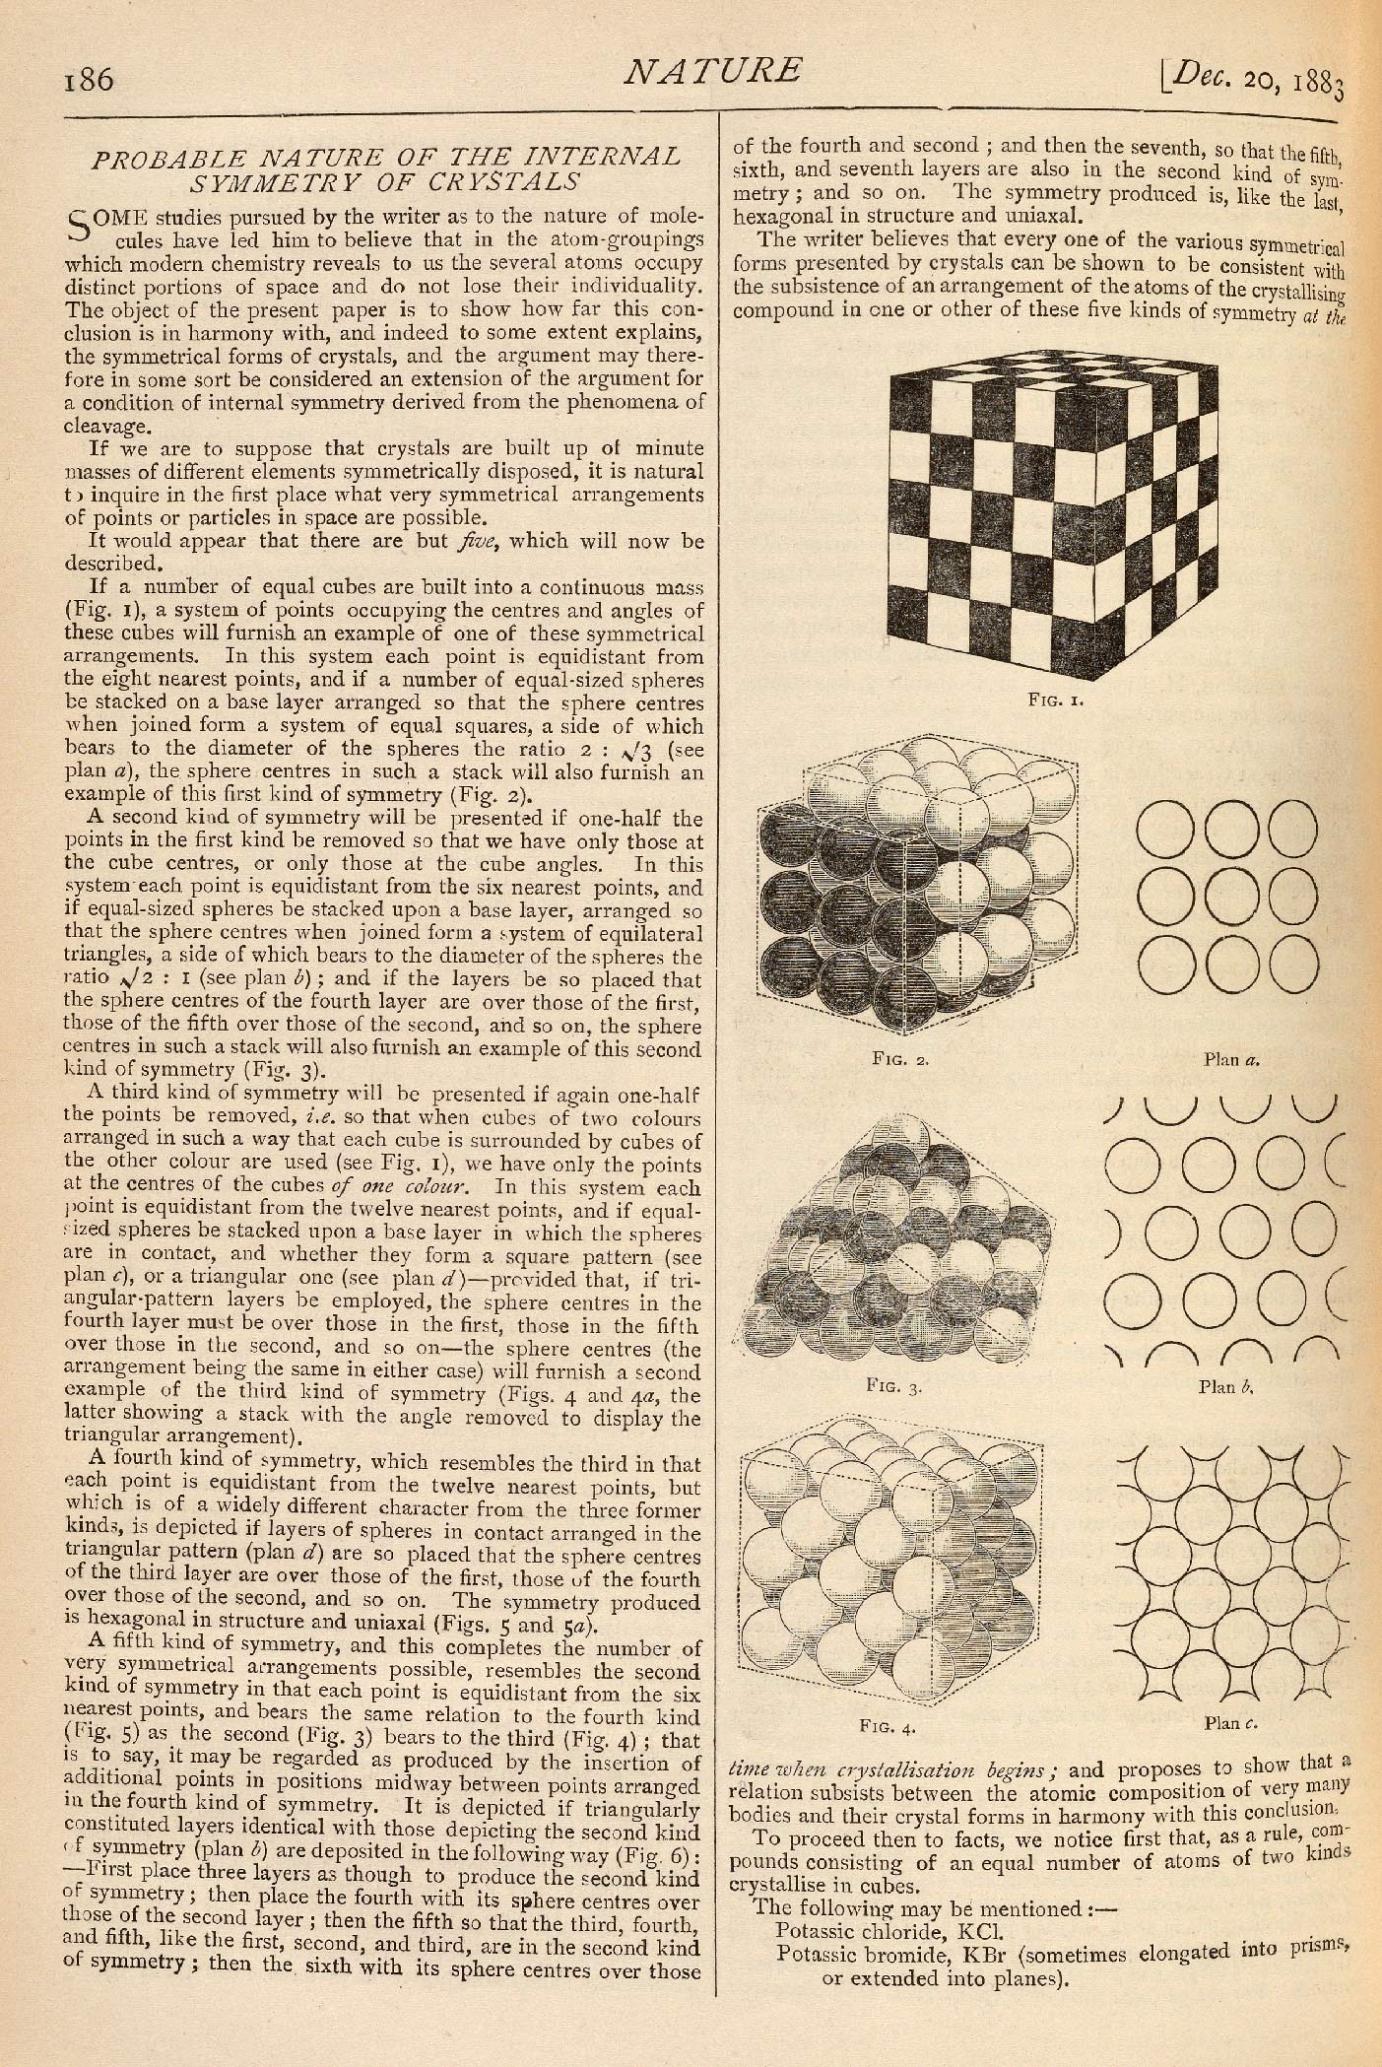 page 186, Nature article